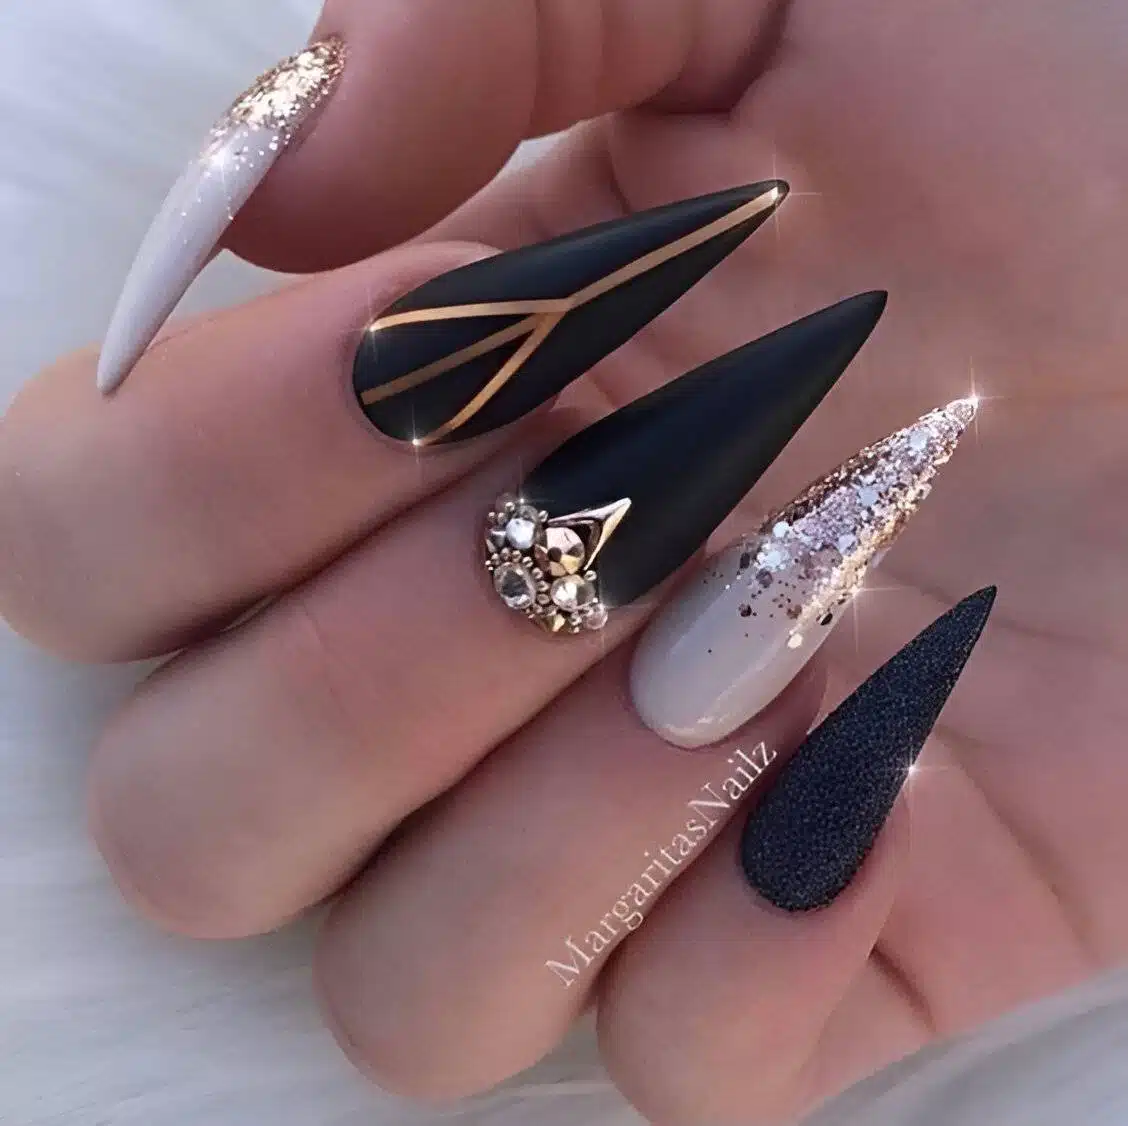 Attention, Beauty Queens: 30 Irresistible Black Acrylic Nail Designs - 207